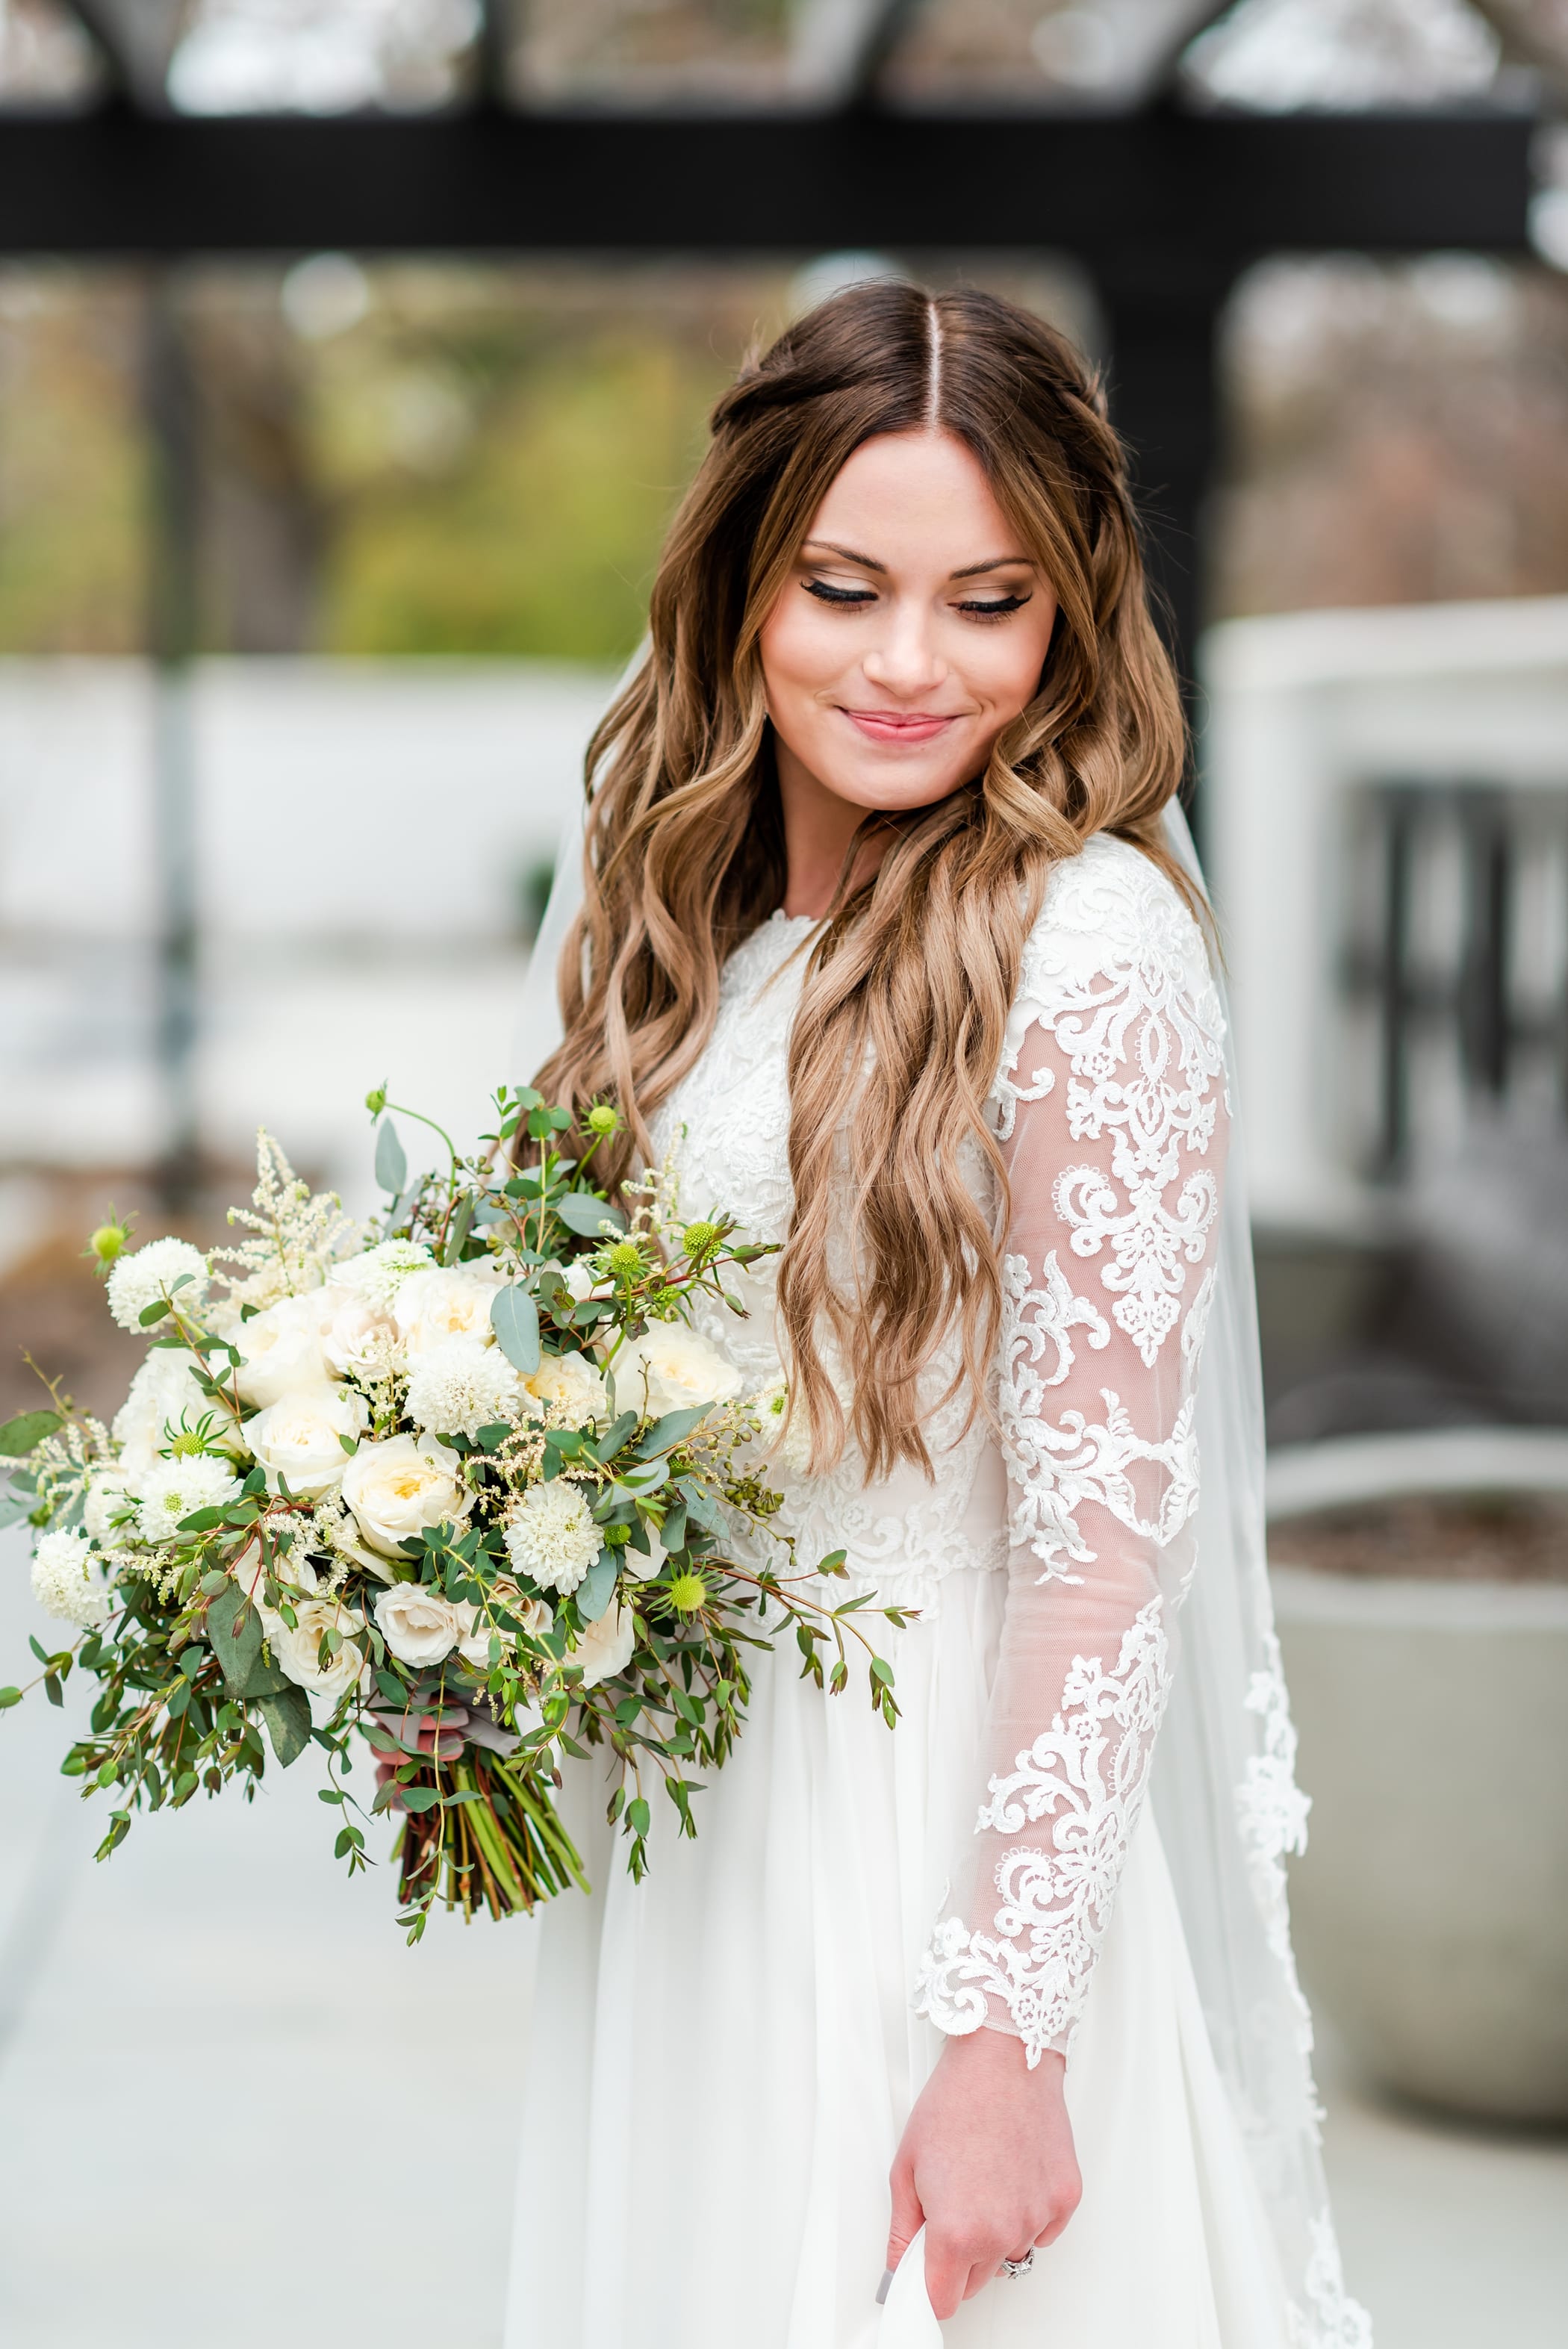 Bride with lace long sleeve wedding dress and Organic white and green bouquet for a spring wedding